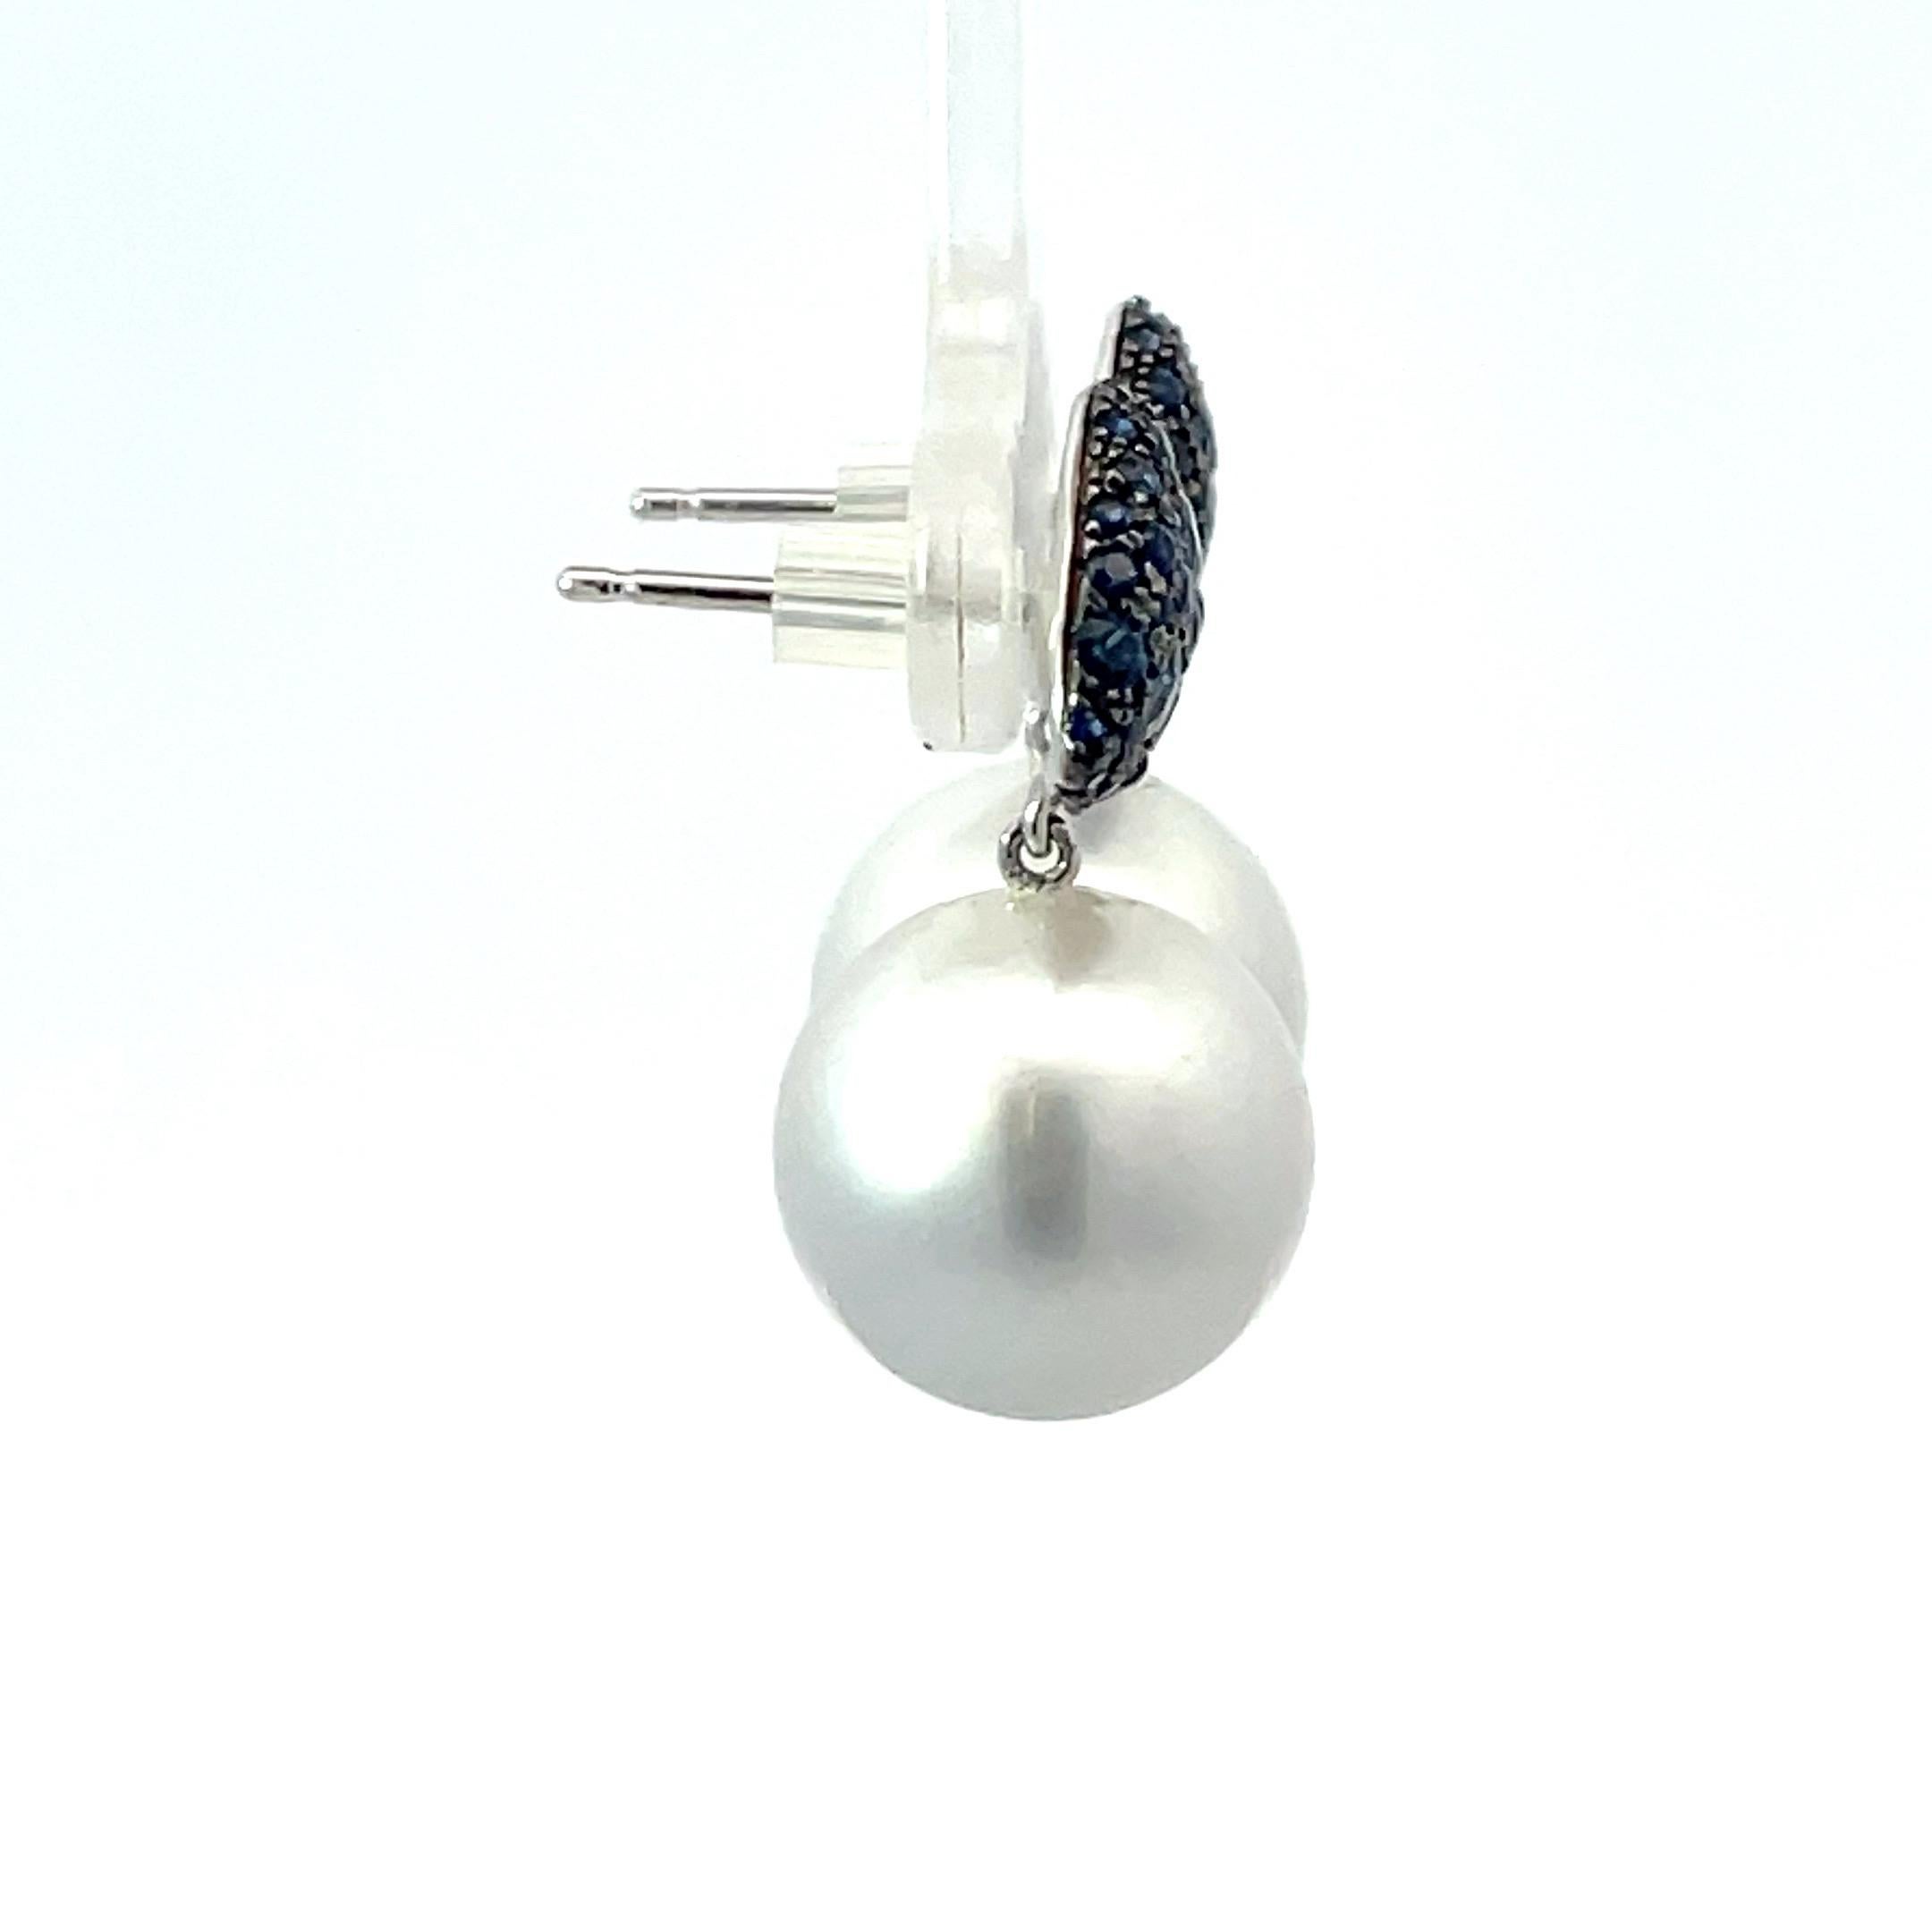 18 Karat White Gold drop earrings featuring two South Sea Pearls measuring 12-13 MM and 76 blue Sapphires weighing 1.33 Carats.
Pearls earrings can be changed to Tahitian, Pink, Gold or South Sea
DM for more videos and pictures on my ear. 
Search